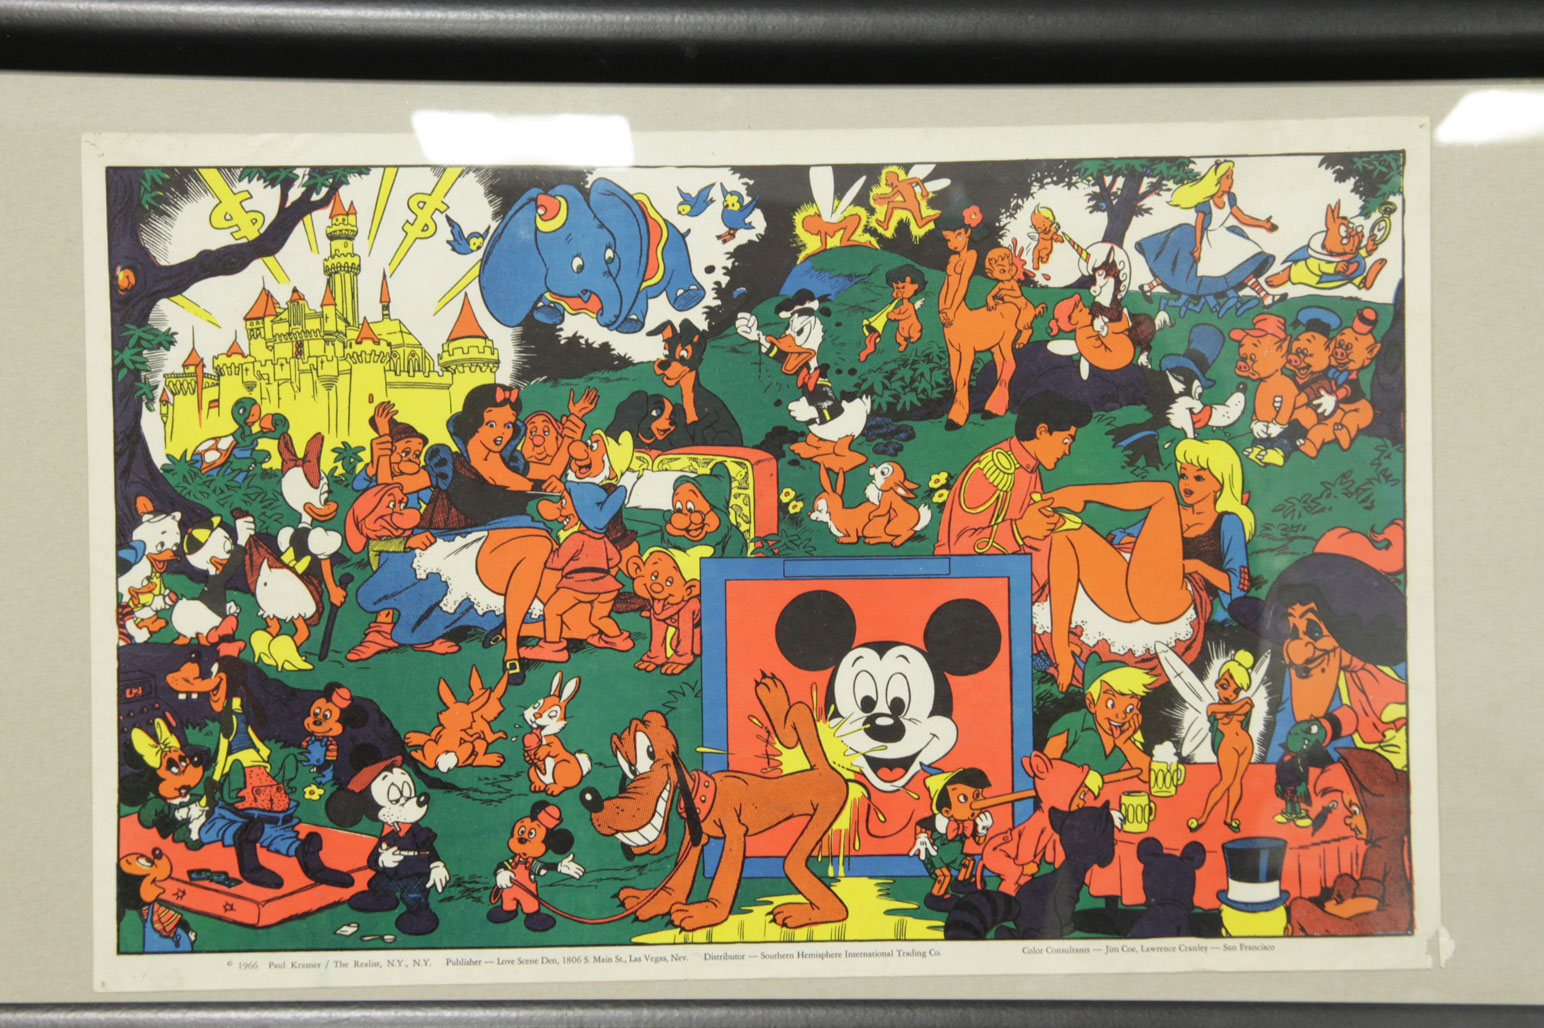 Lot #710 - A Vintage Disneyland Memorial Day Orgy Poster.